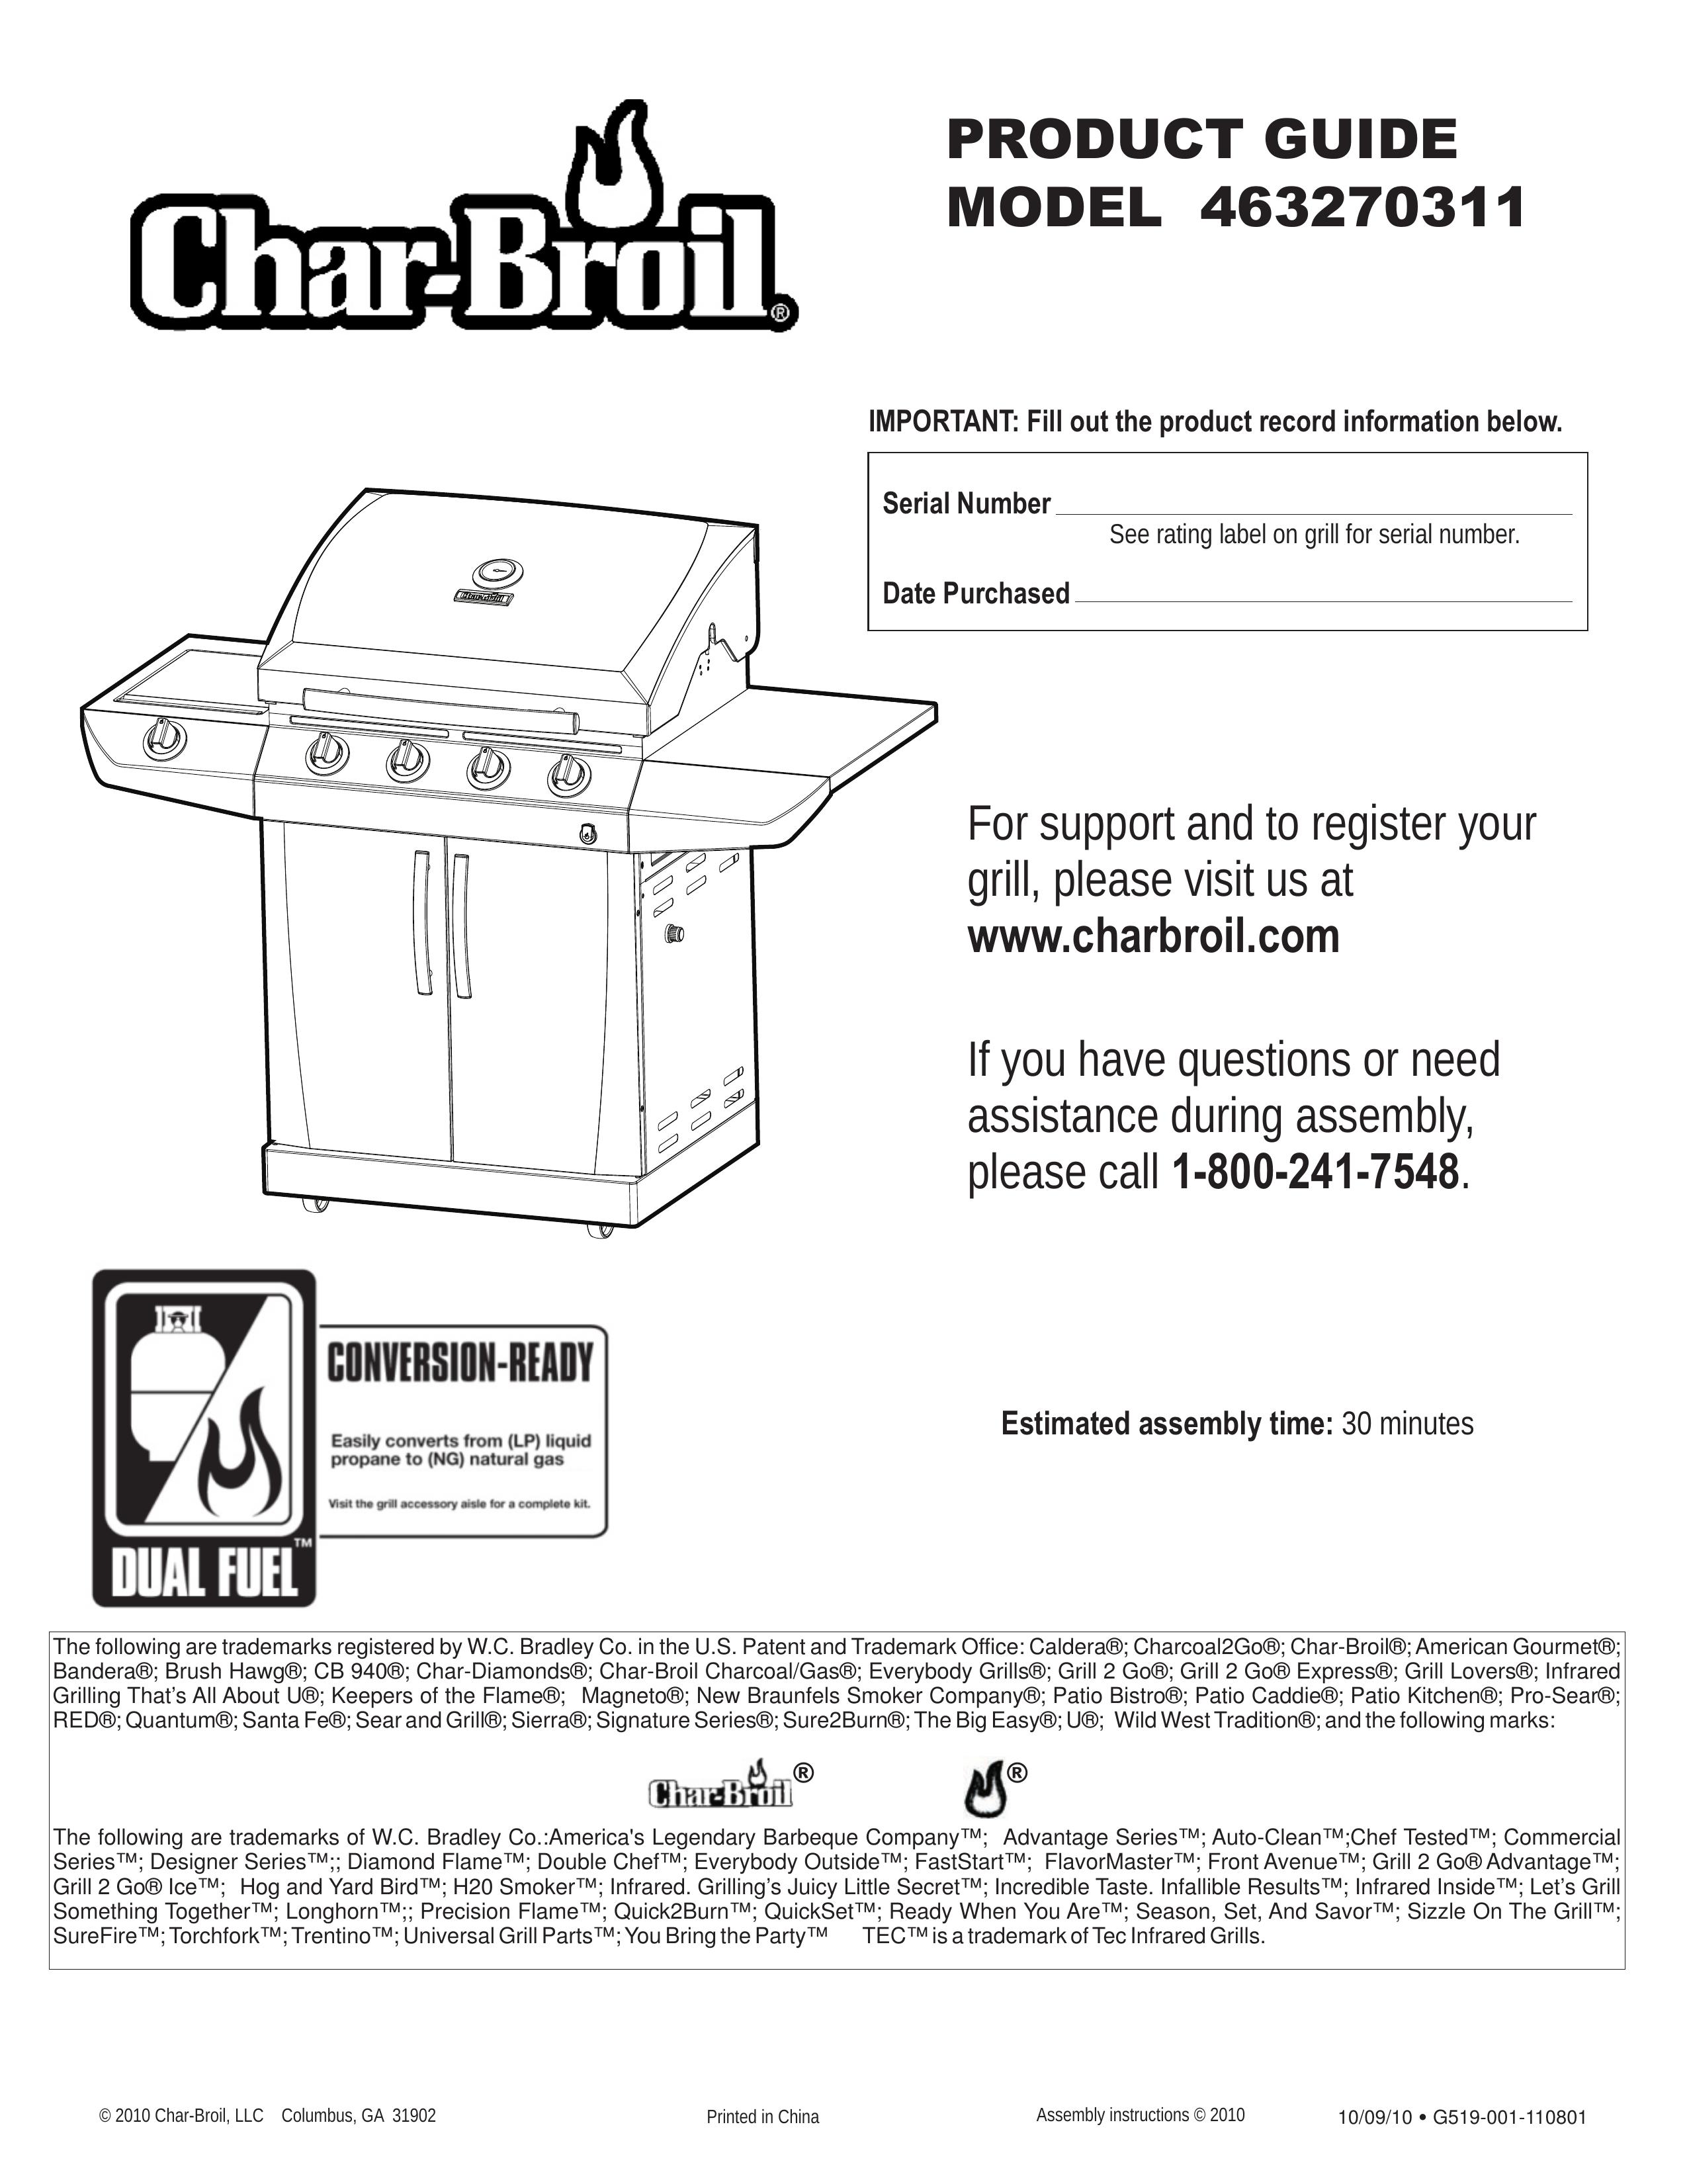 Char-Broil 463270311 Gas Grill User Manual